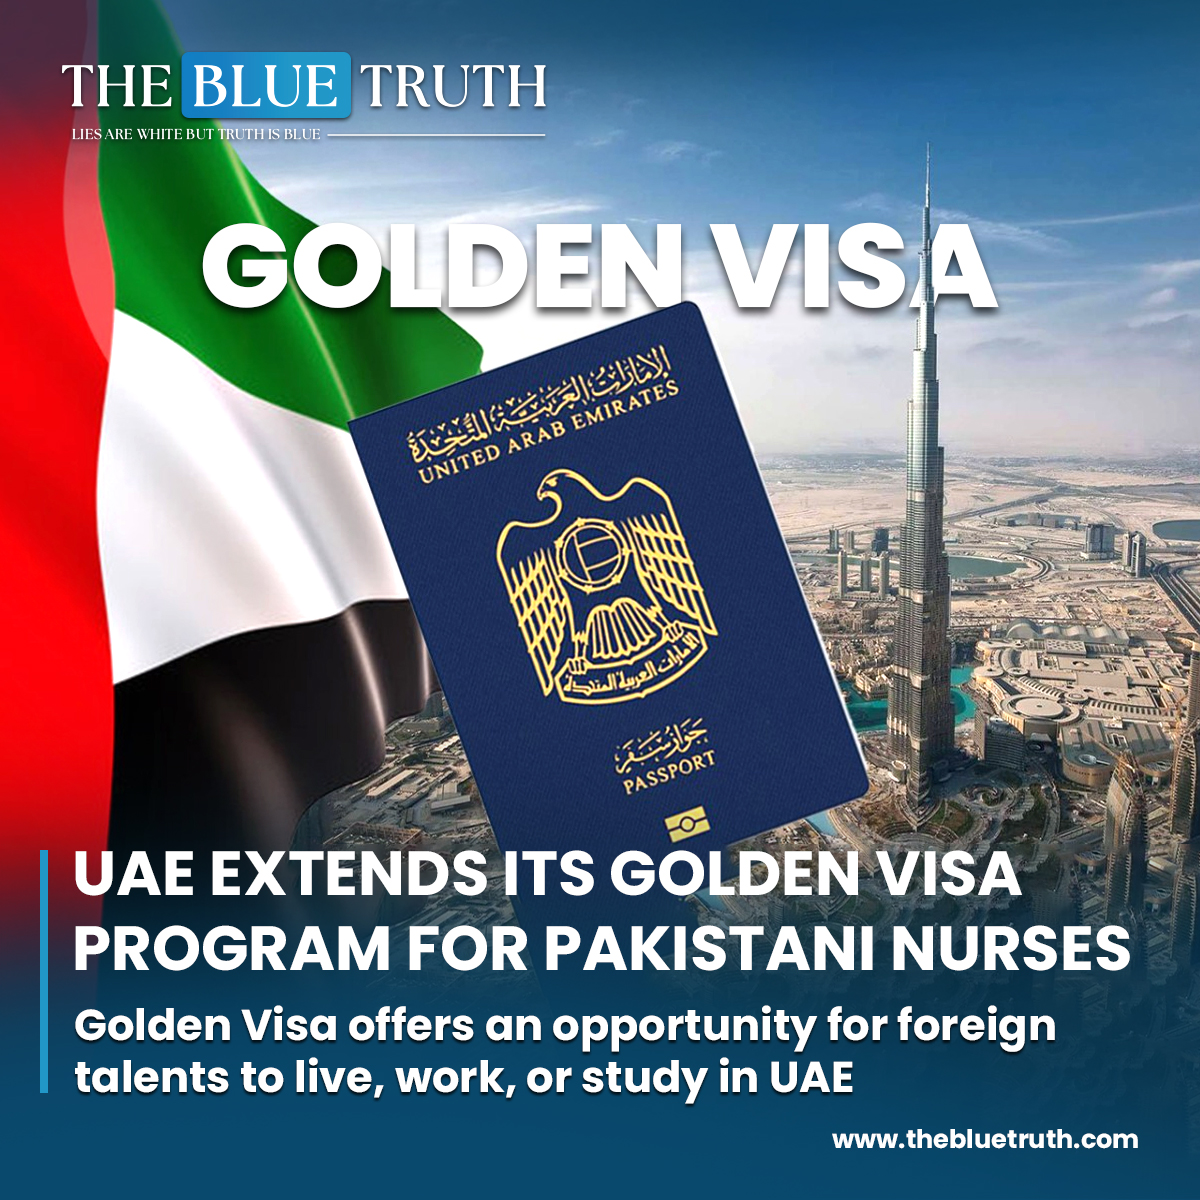 UAE extends its Golden Visa program for Pakistani nurses.
Golden Visa offers an opportunity for foreign talents to live, work, or study in UAE

 #UAE #GoldenVisa #PakistaniNurses #FrontlineHeroes
#WorkAbroad #ResidenceVisa #UAEVisa #ForeignTalents #TBT #TheBlueTruth